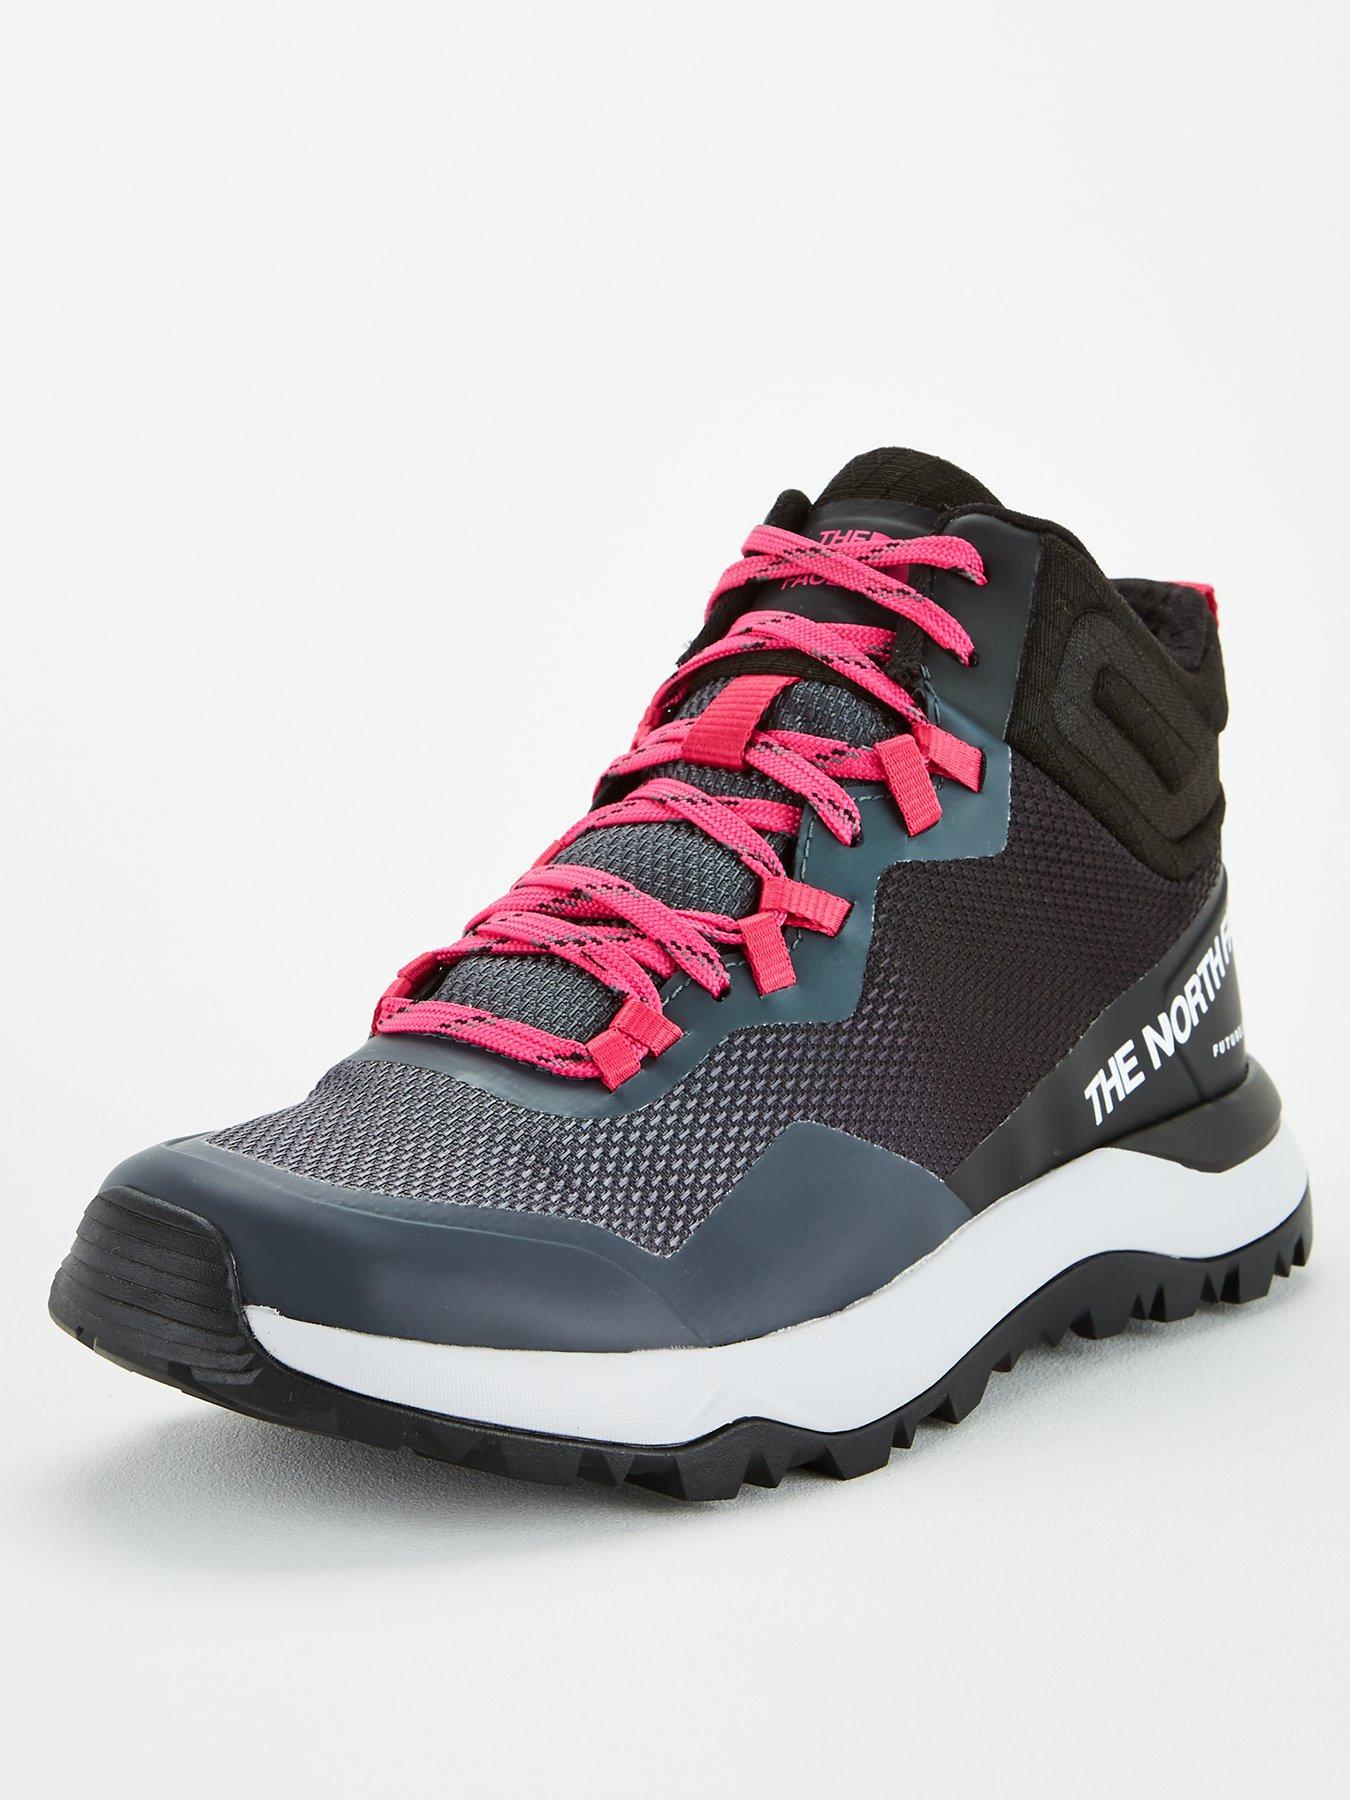 pink north face boots